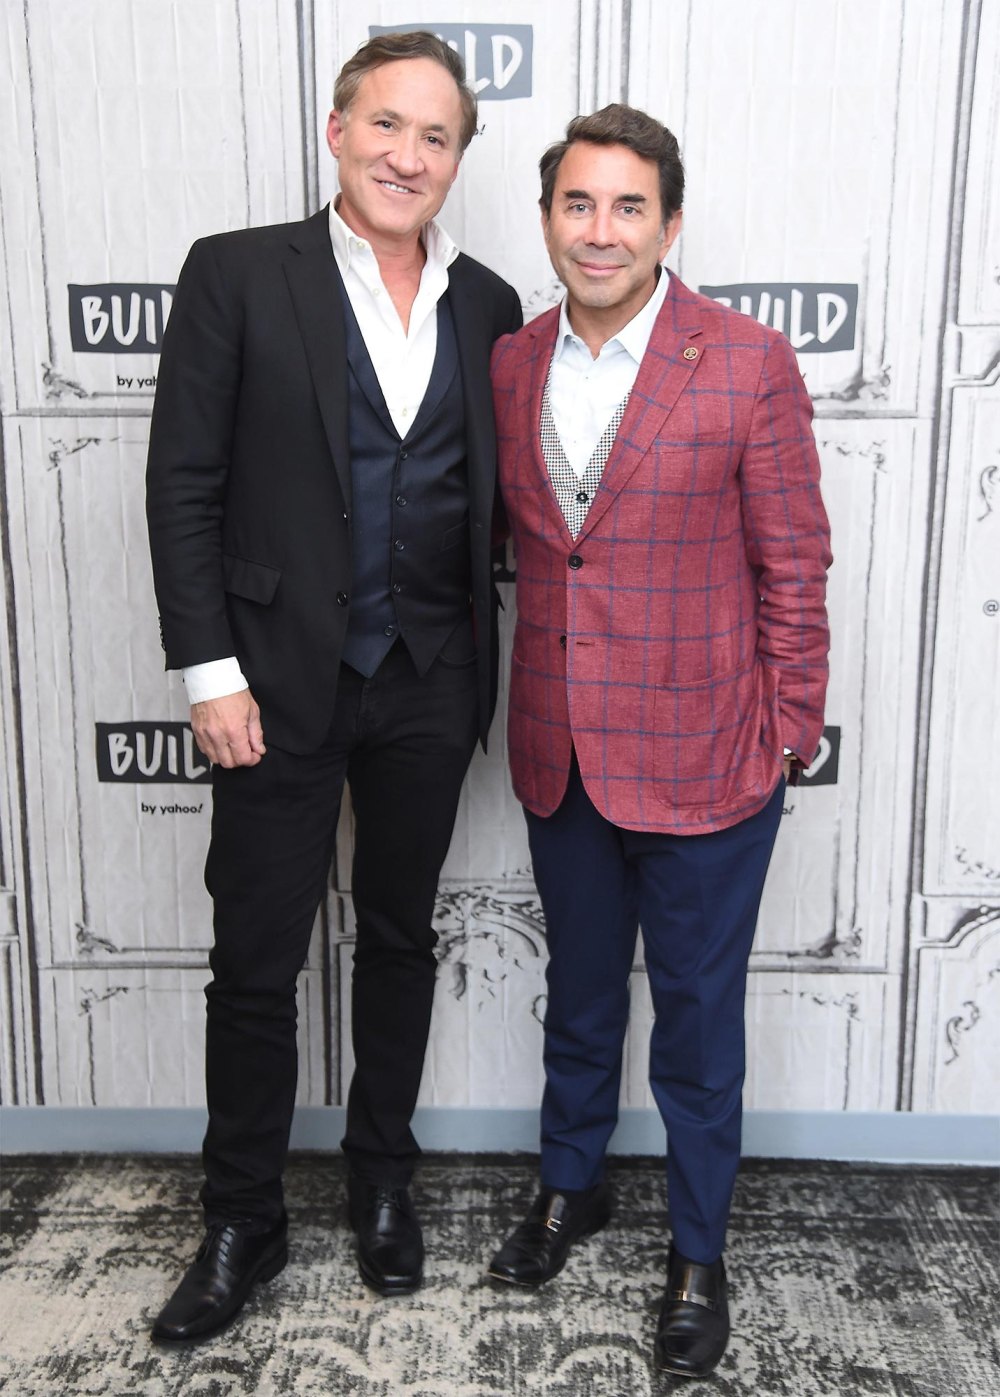 Dr Terry Dubrow and Dr Paul Nassif Get Candid